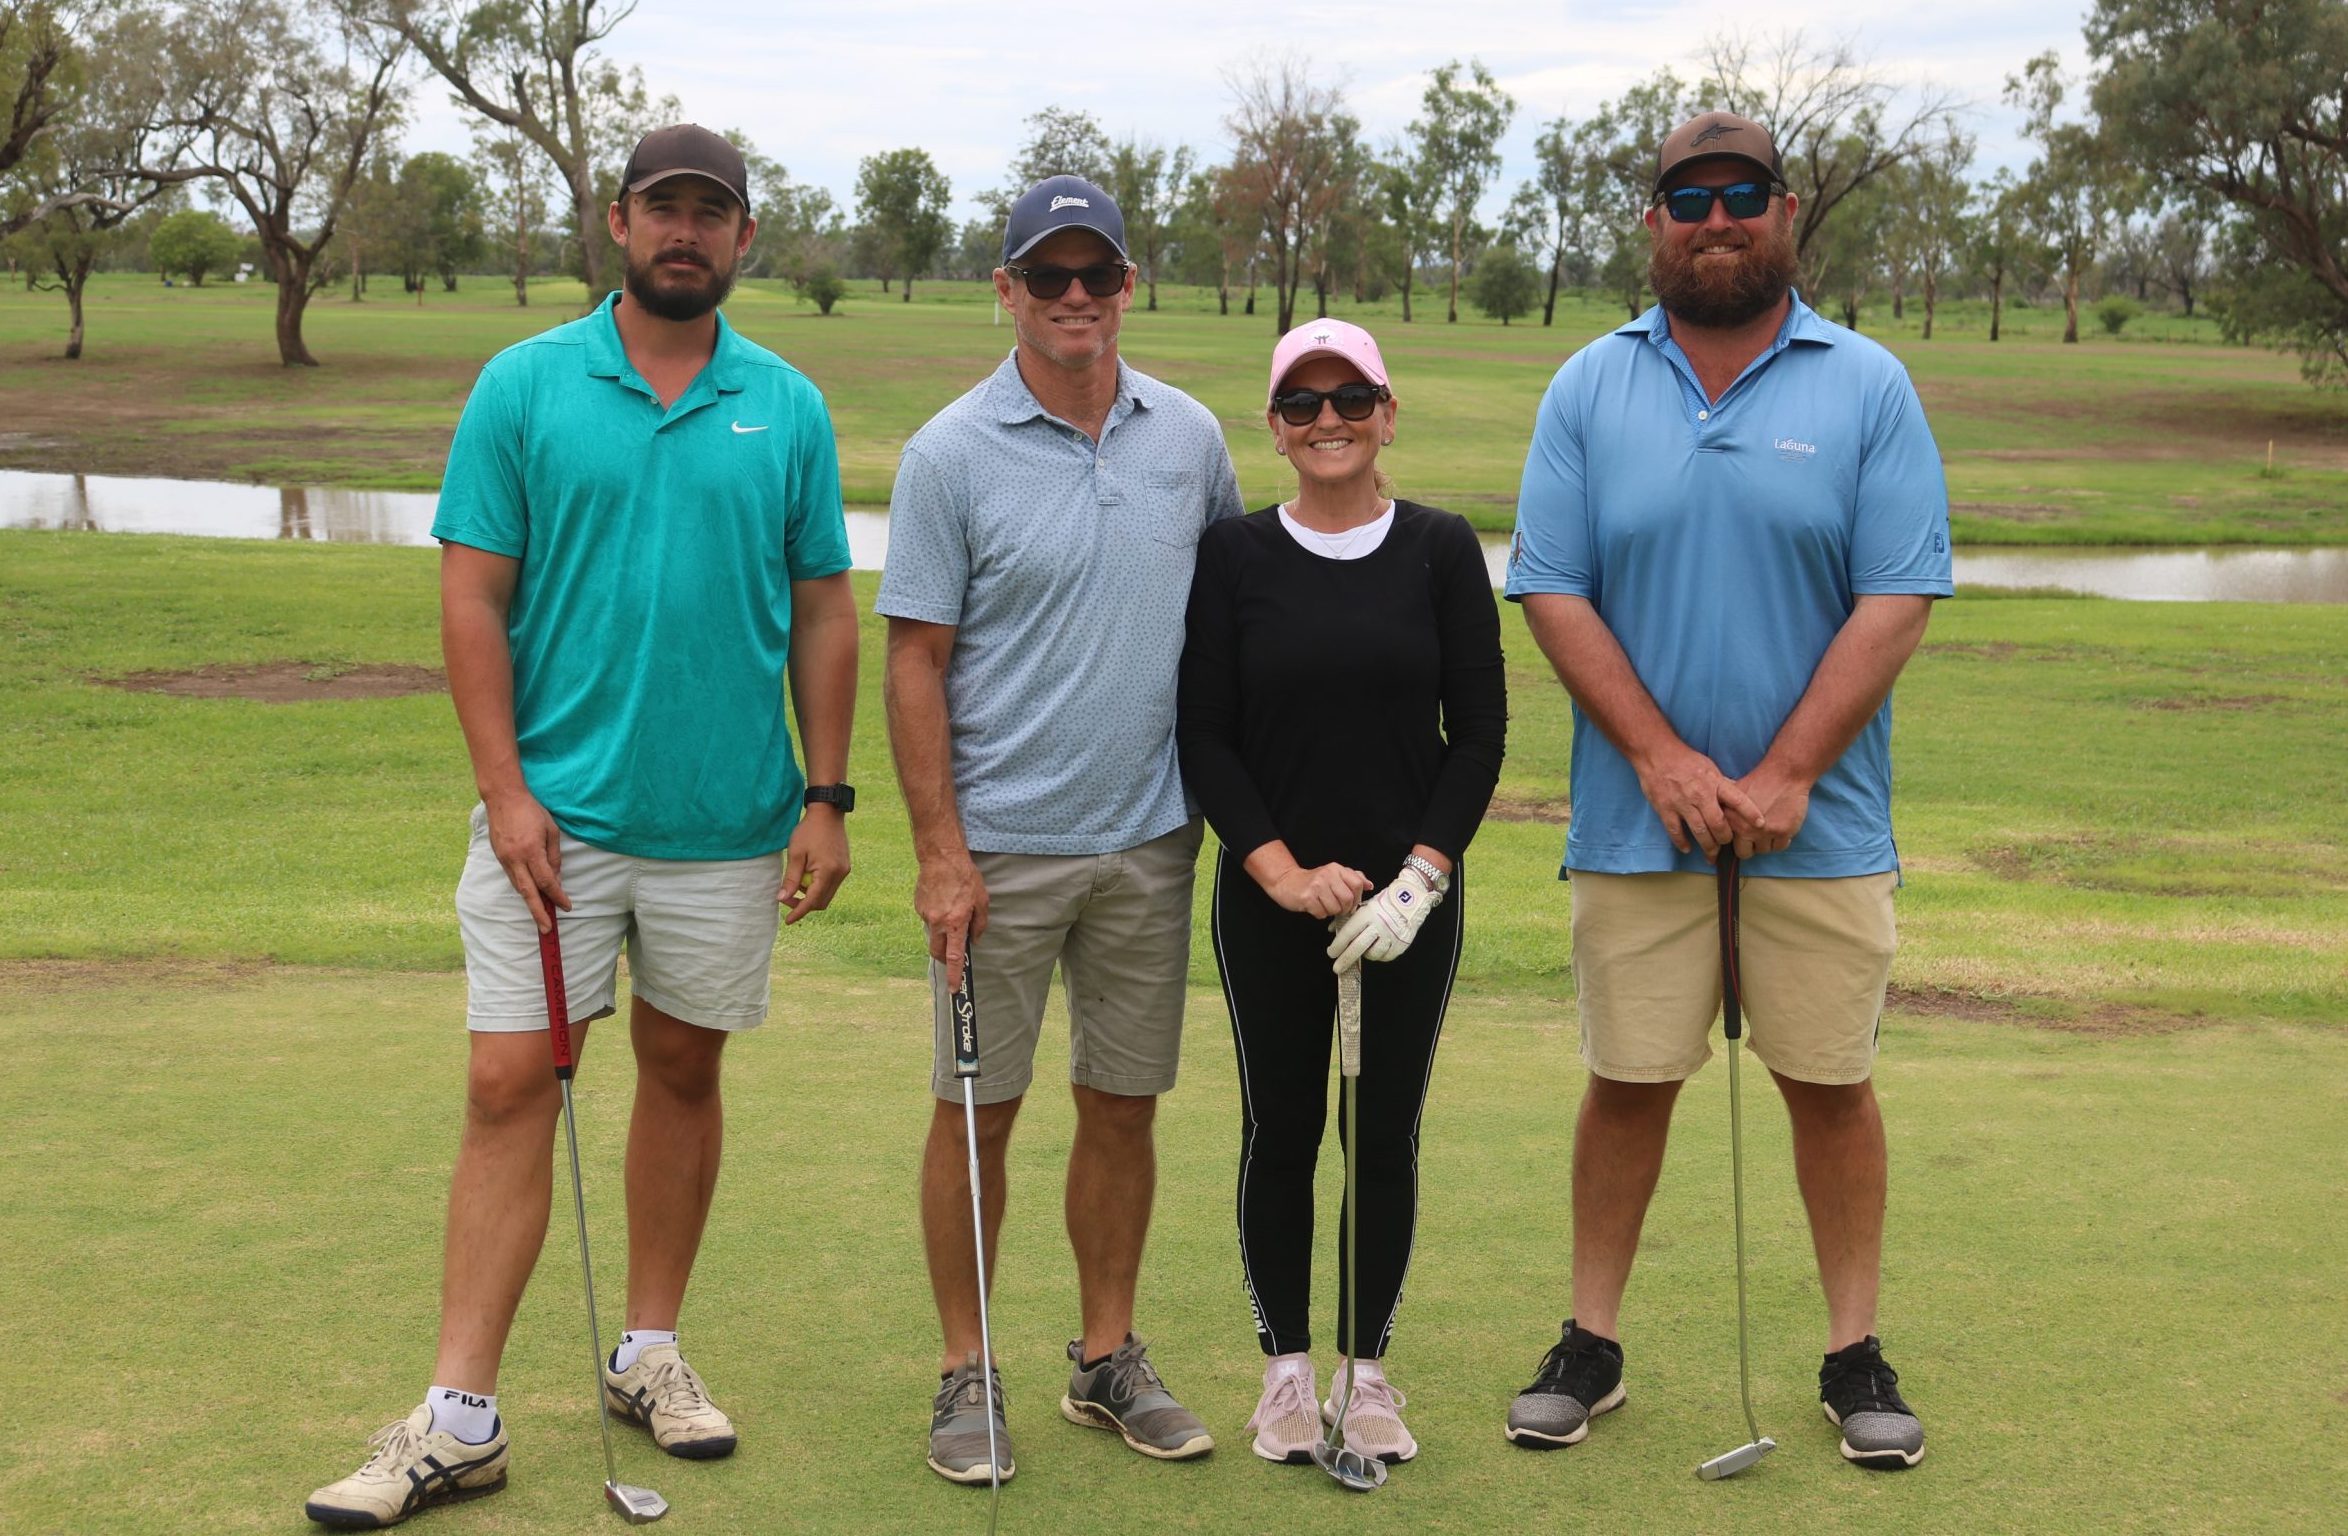 Todd Farrer, Steve and Dianne Parish and Dylan Armitage win Wee Waa Volkswagen Scramble